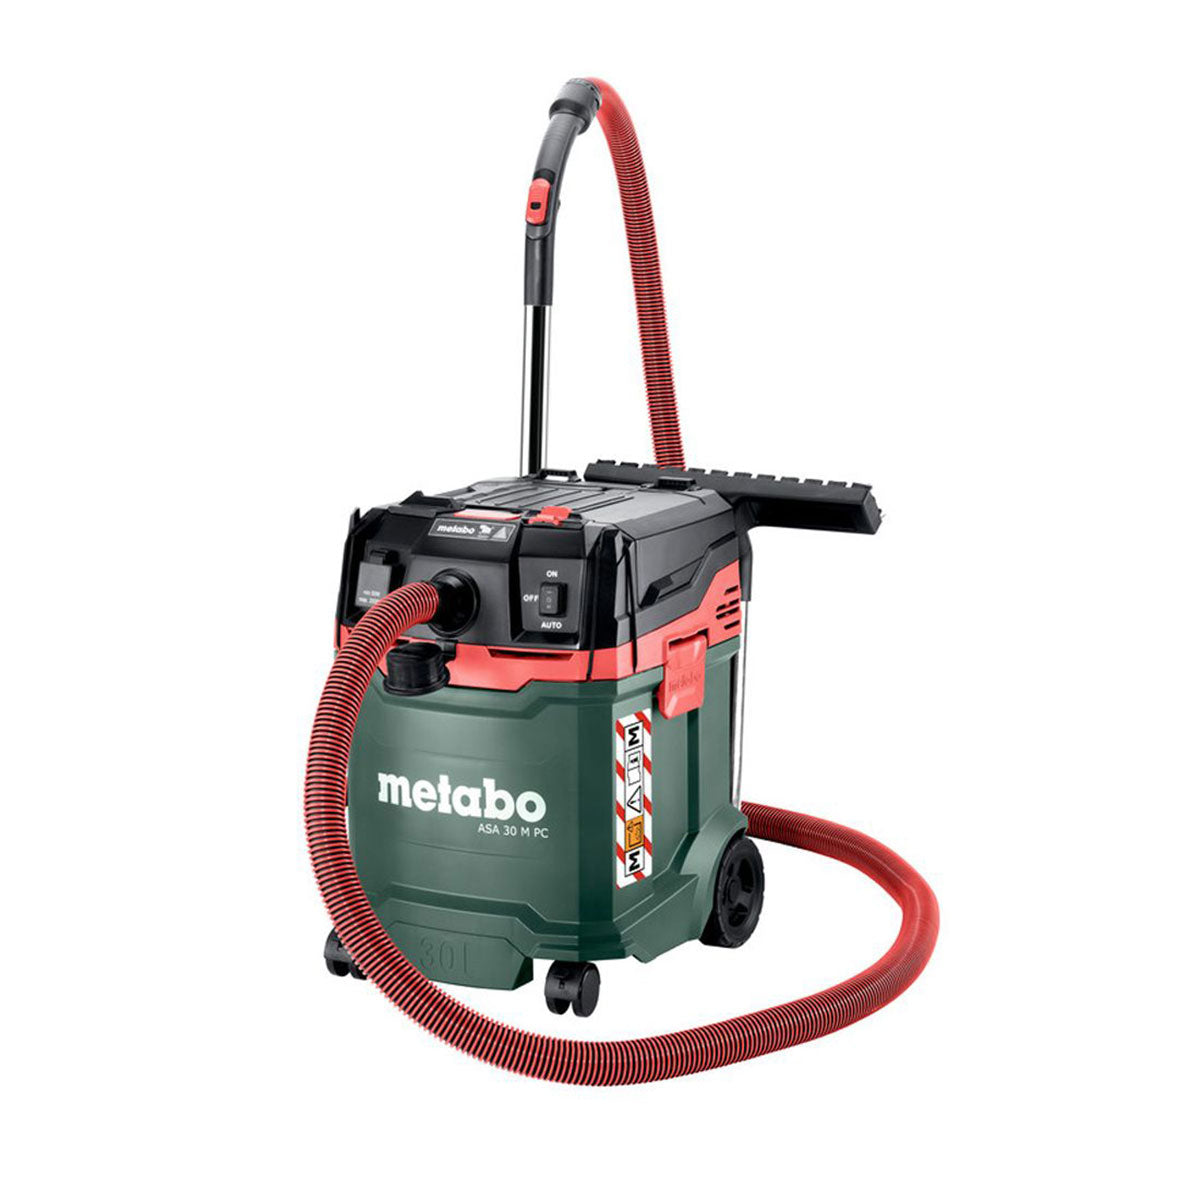 Metabo ASA 30 M PC M-Class All-Purpose Vacuum Cleaner 240V/1200W 602087380